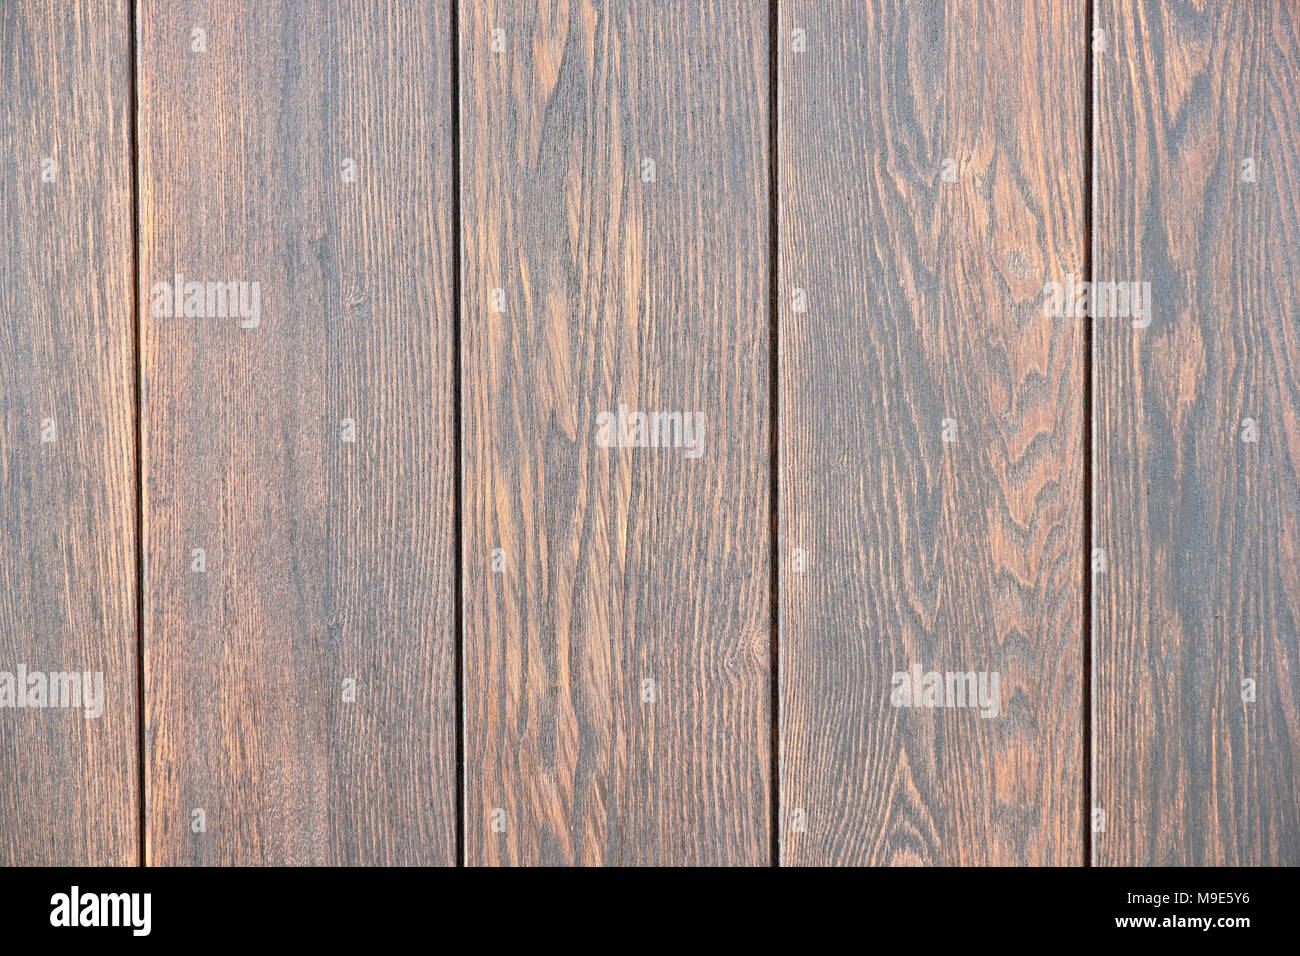 Five vertical wooden planks painted dark brown. Closeup view Stock Photo